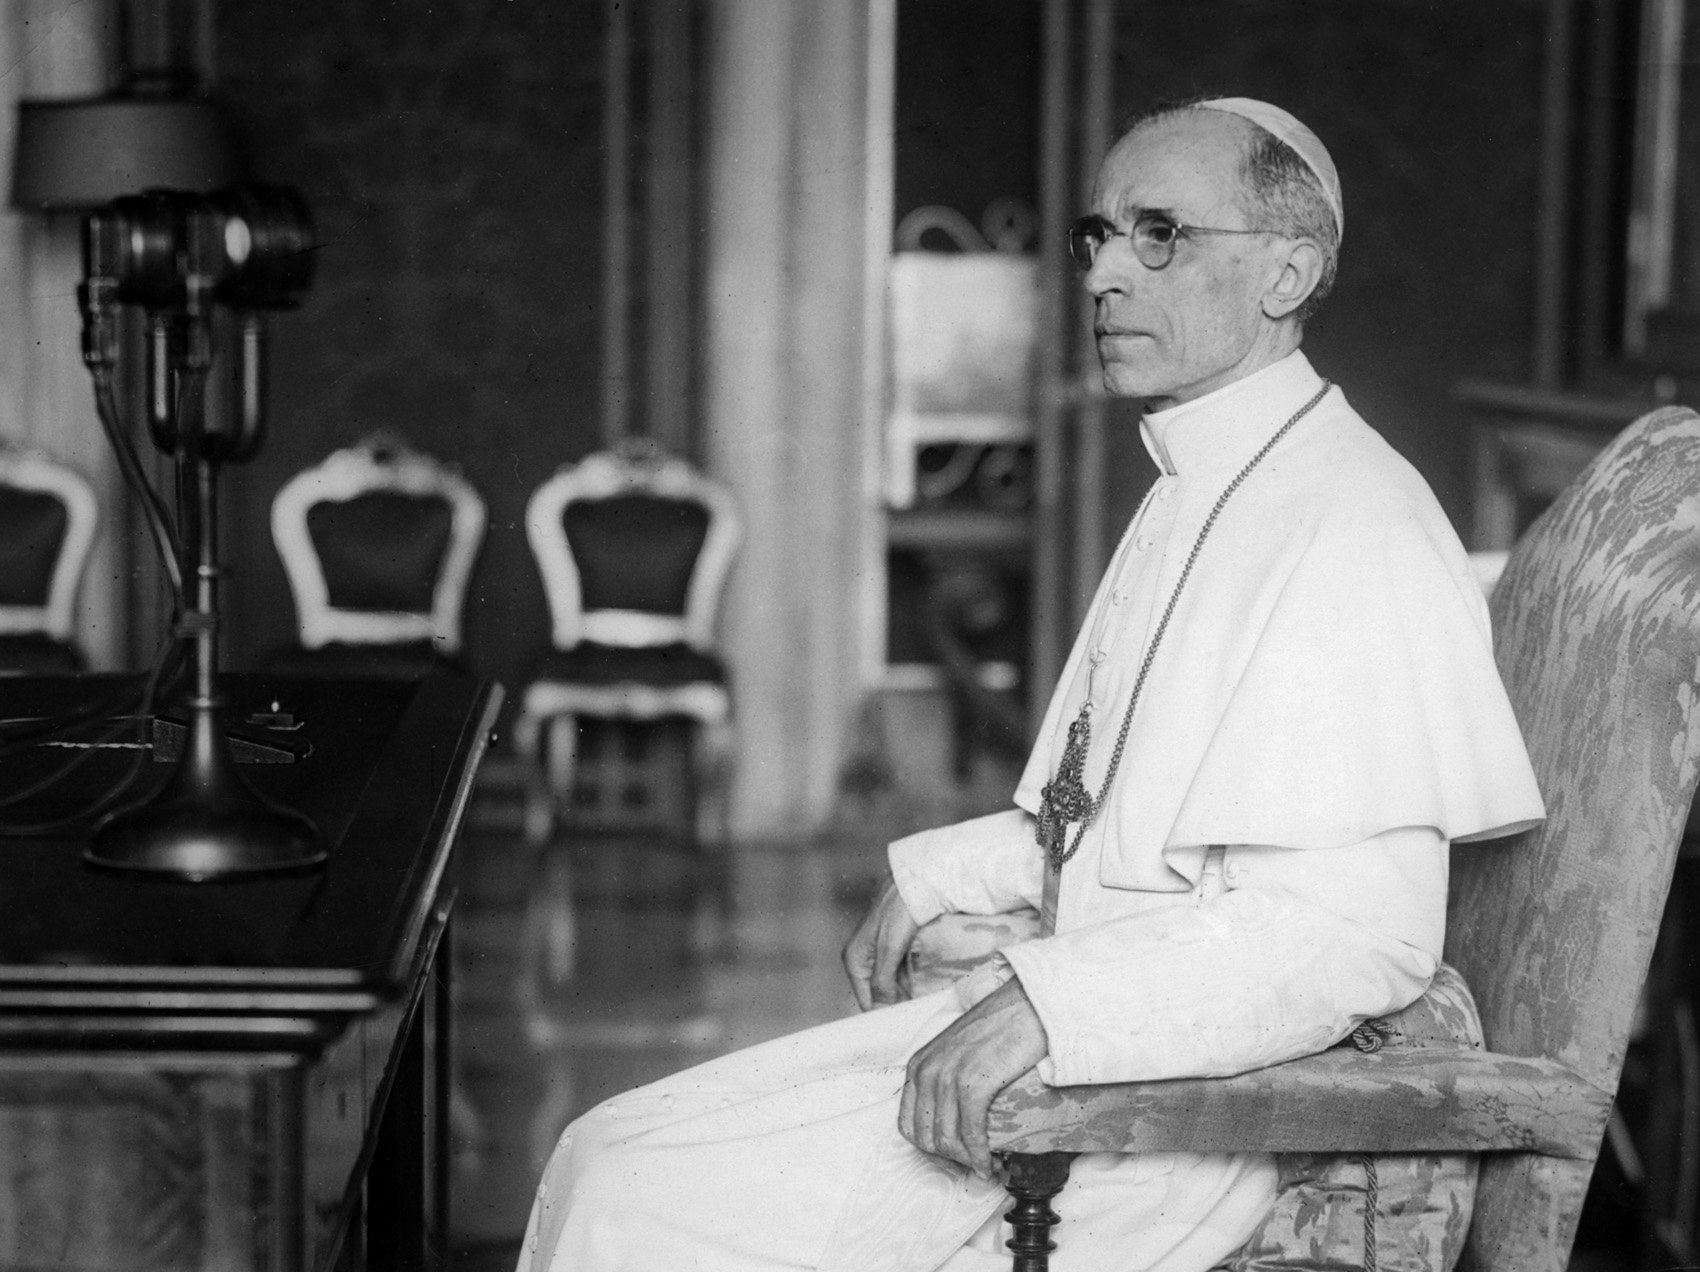 File photo of Pope Pius XII.